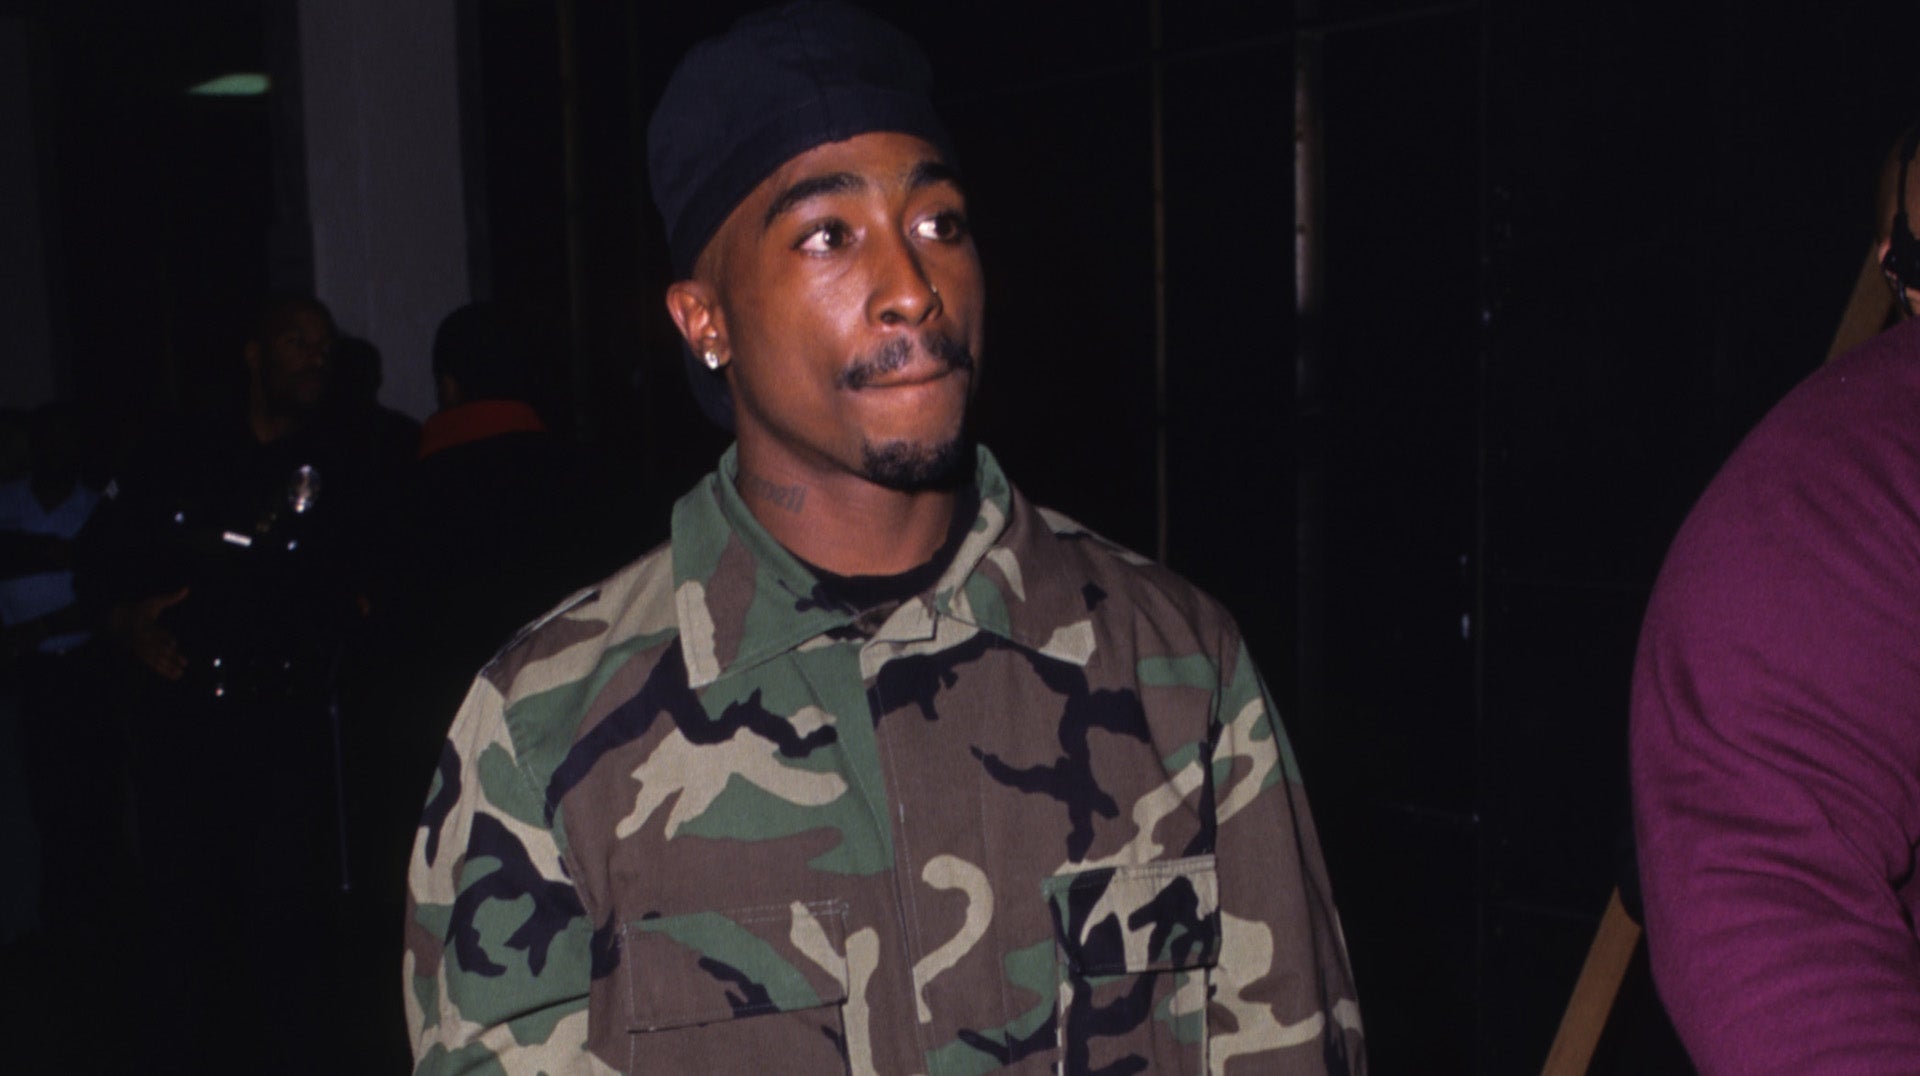 The Truth Behind Tupac Shakur’s 1996 Murder: ‘It Was Simple Retaliation,’ Reveals an LAPD Source